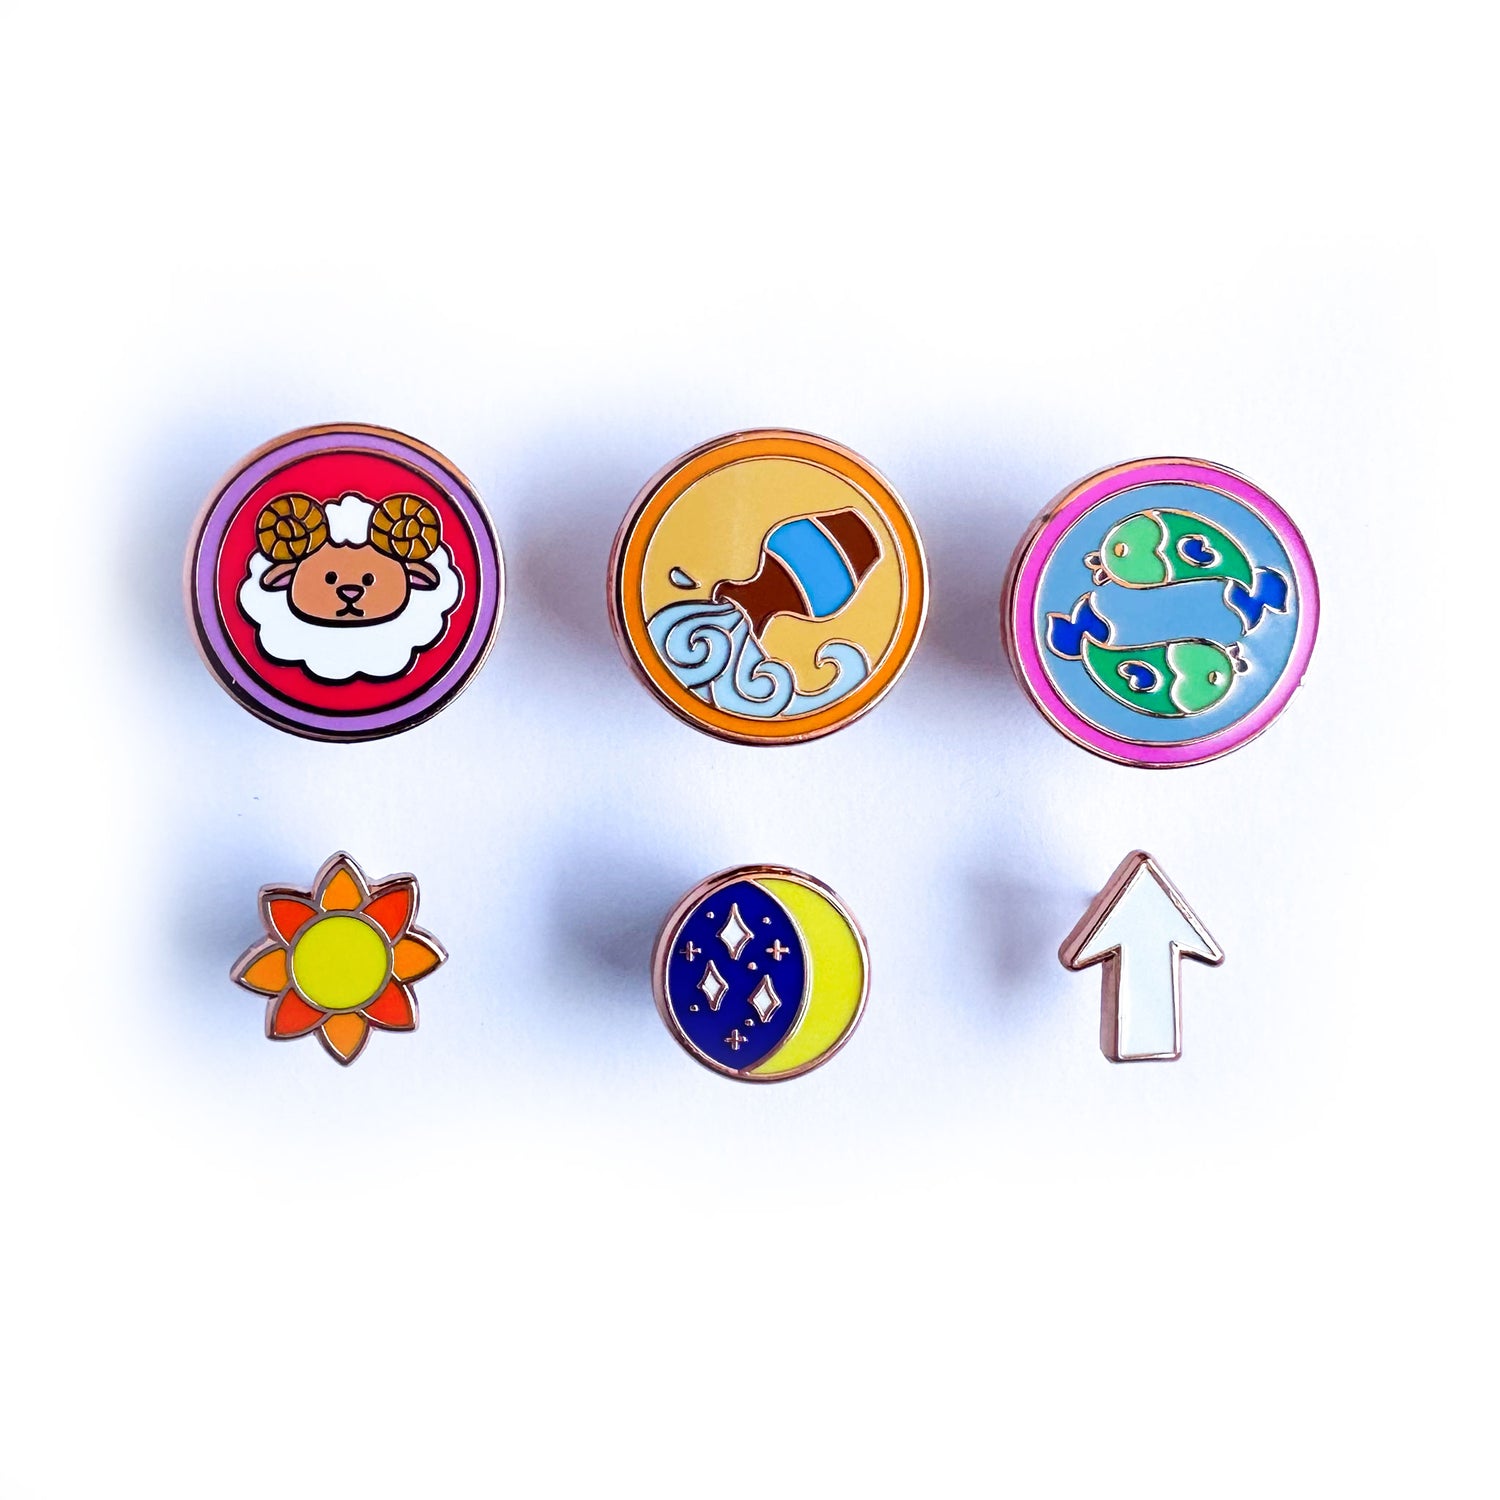 A set of six enamel pins, three are circles with cute illustrations representing zodiac signs. and the other three are shaped like a sun, moon, and rising arrow. 